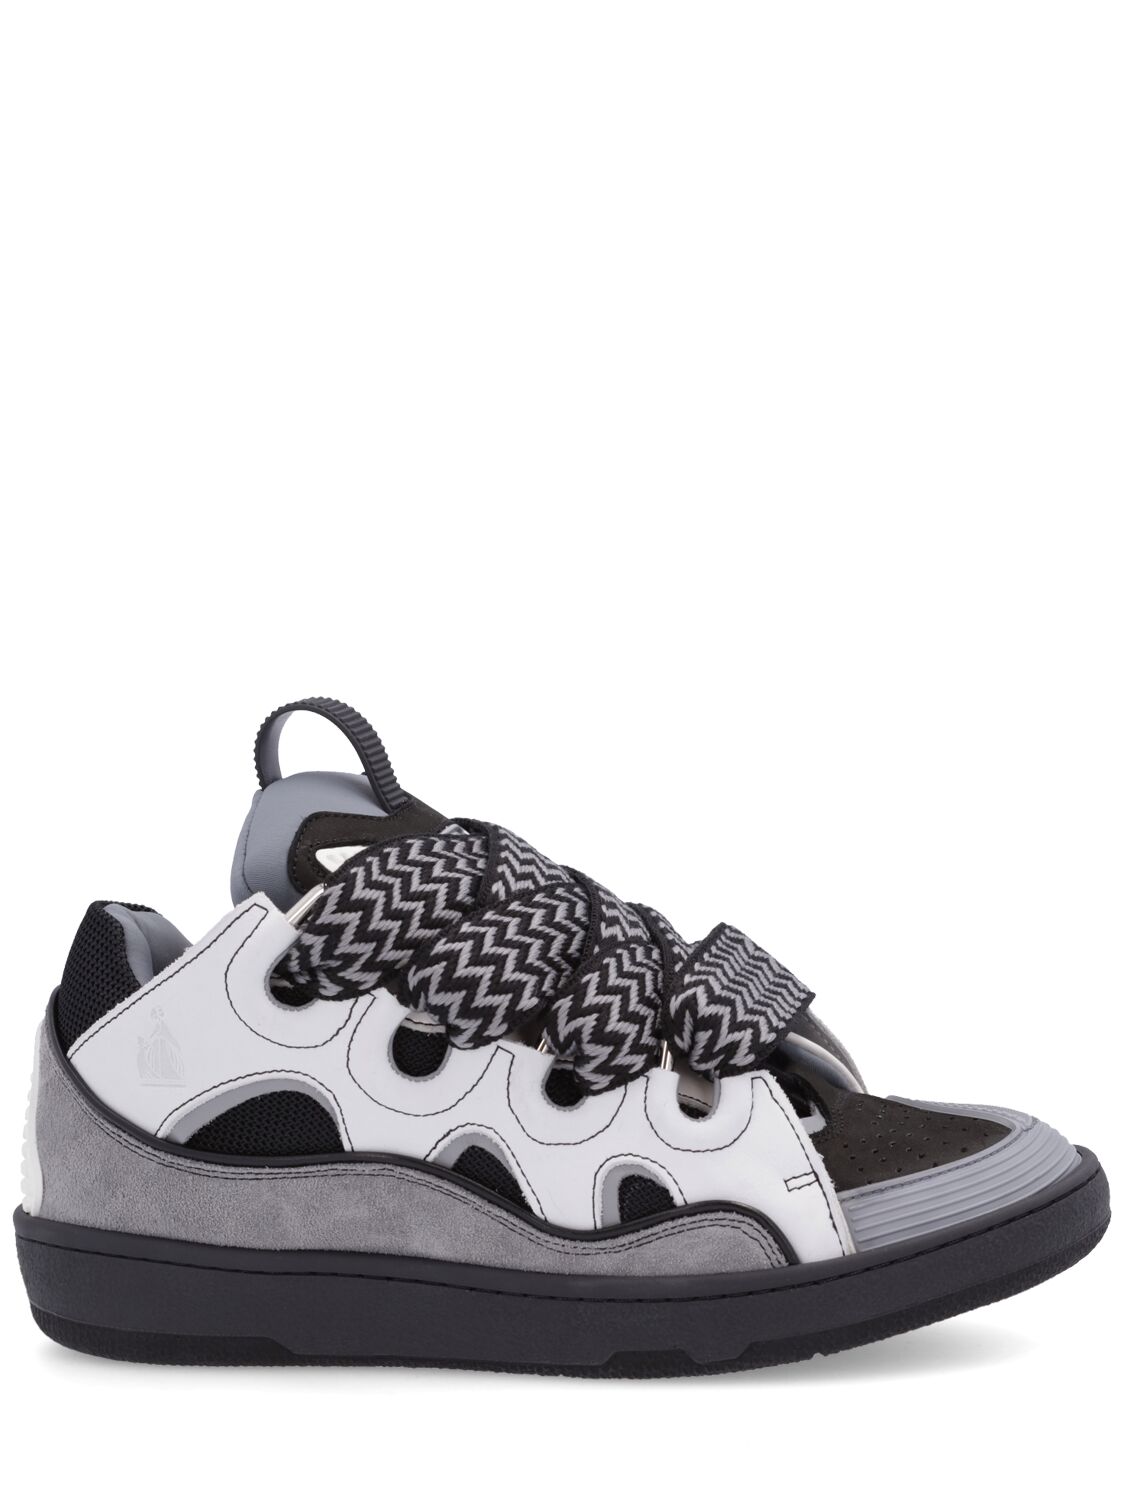 Shop Lanvin Curb Leather Sneakers In Black,grey